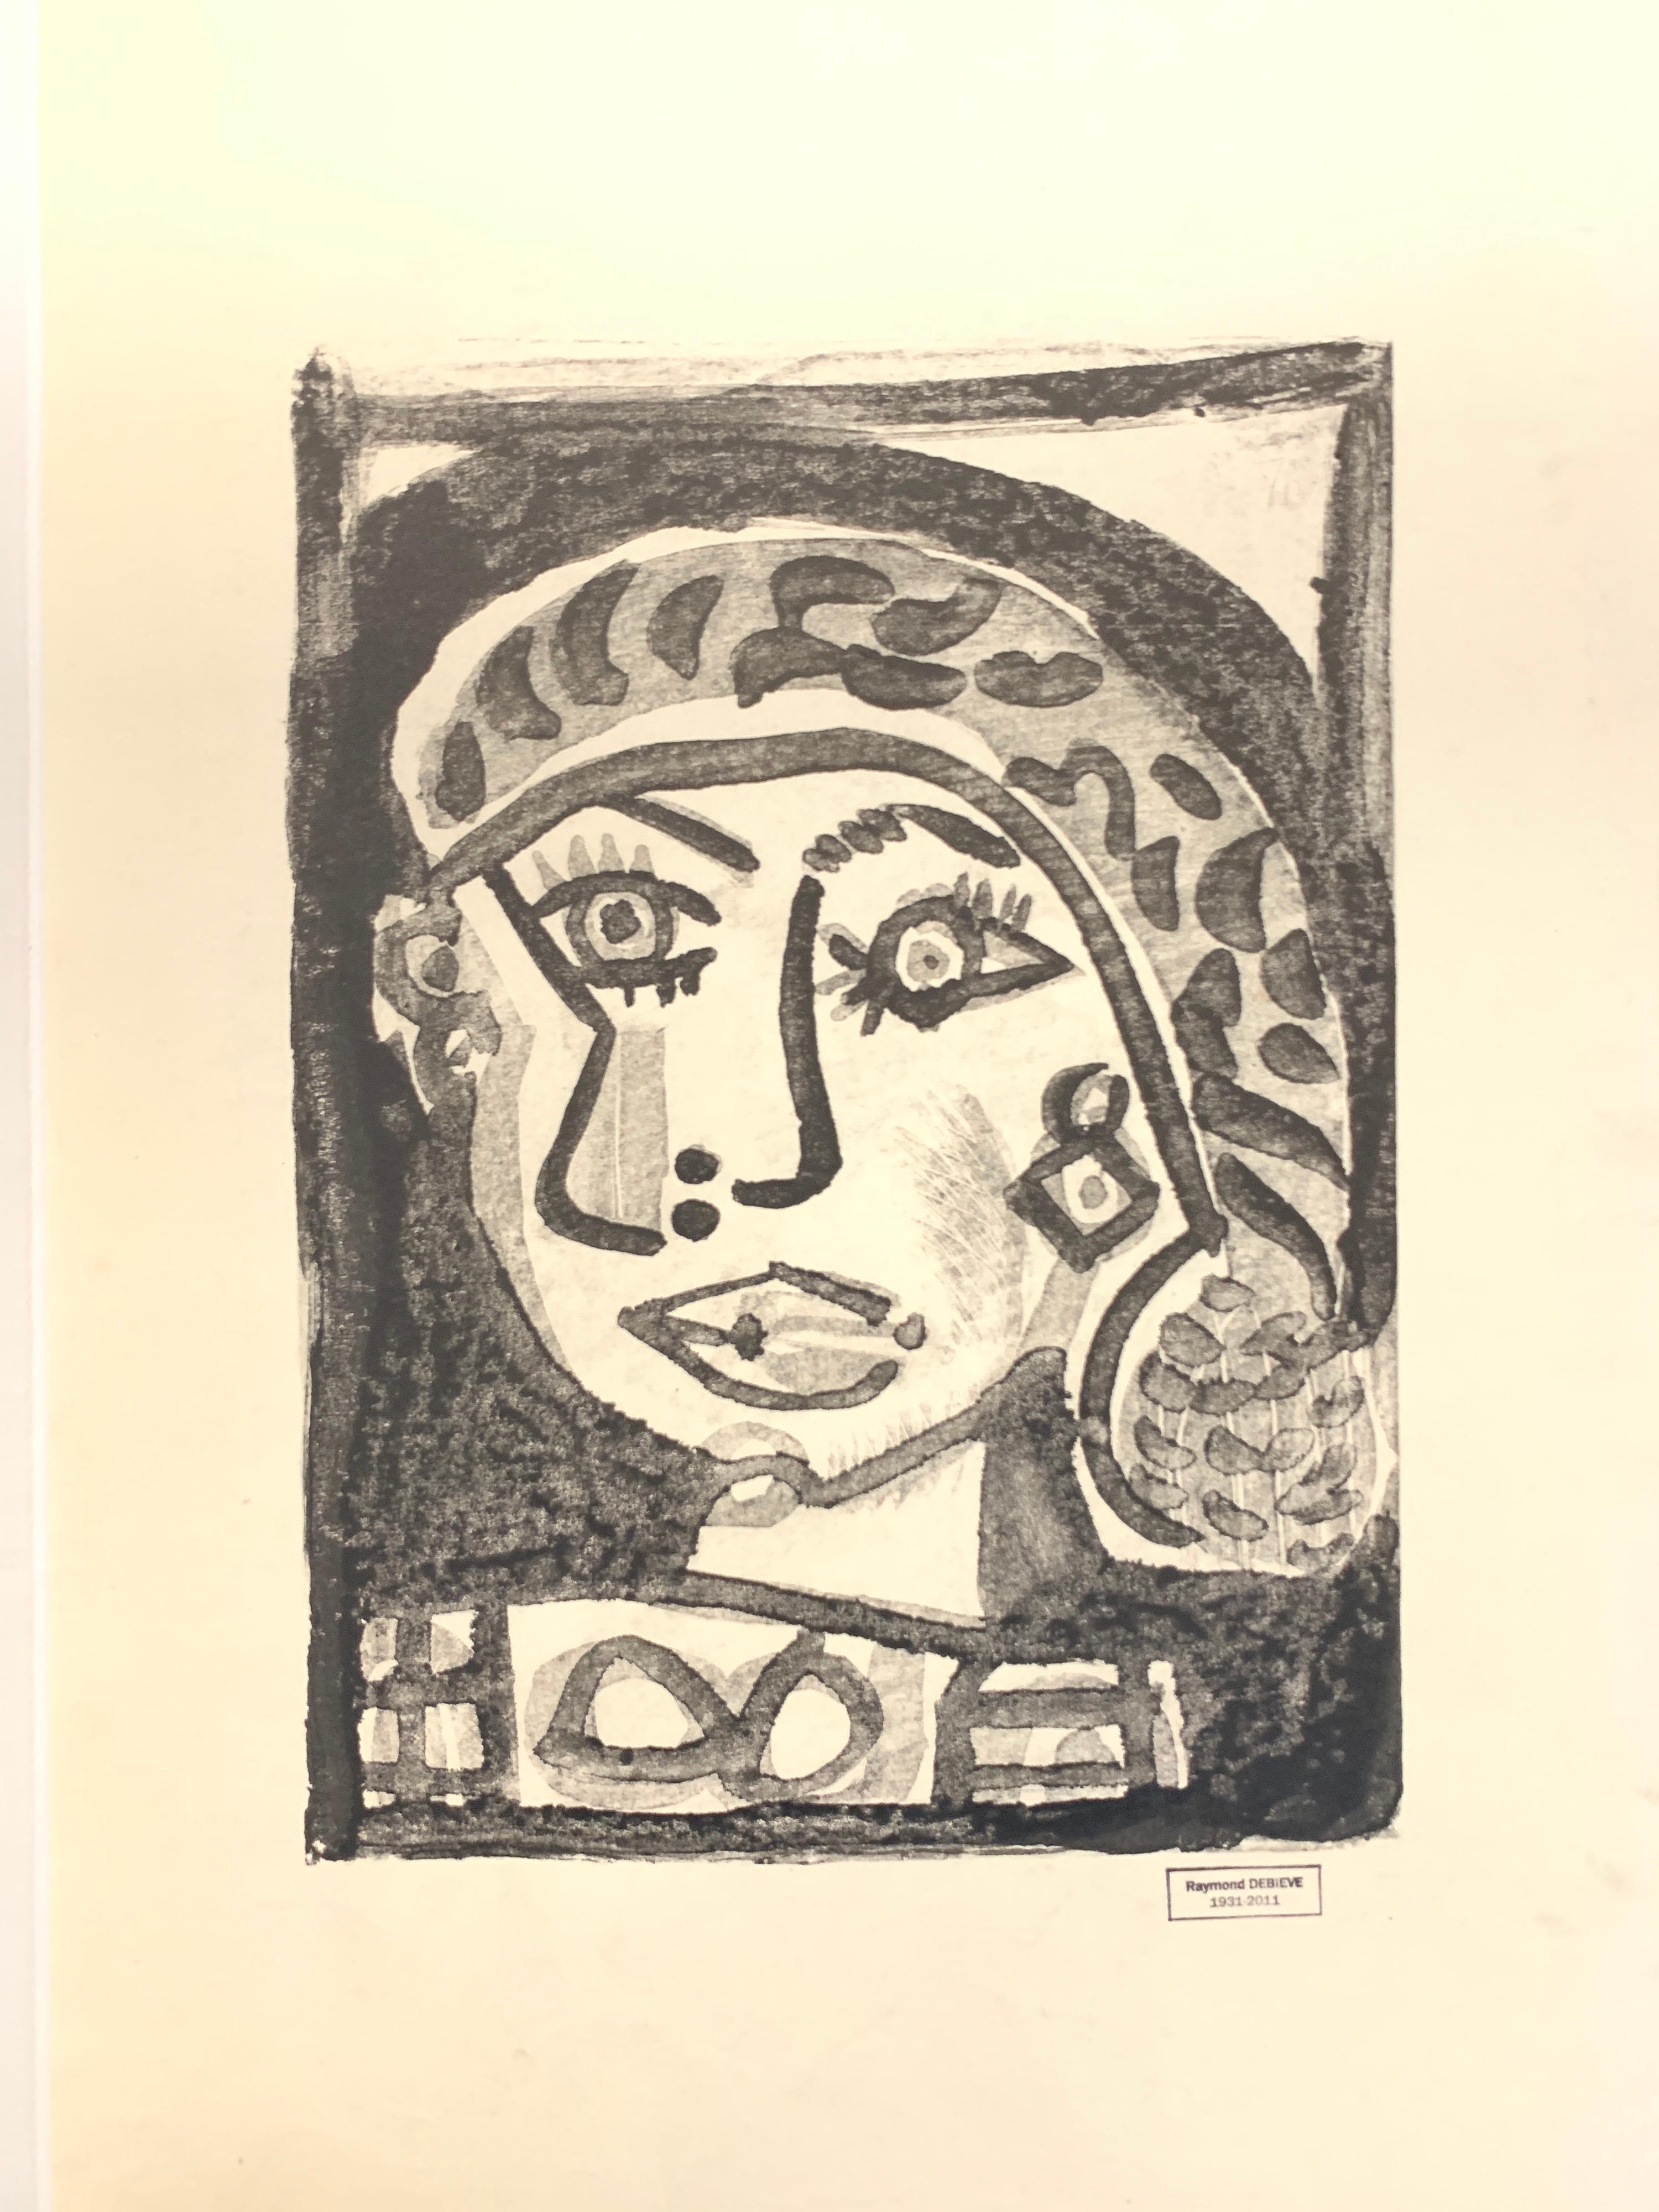 Woman's Face by Raymond Debieve, French Cubist Portrait on Paper